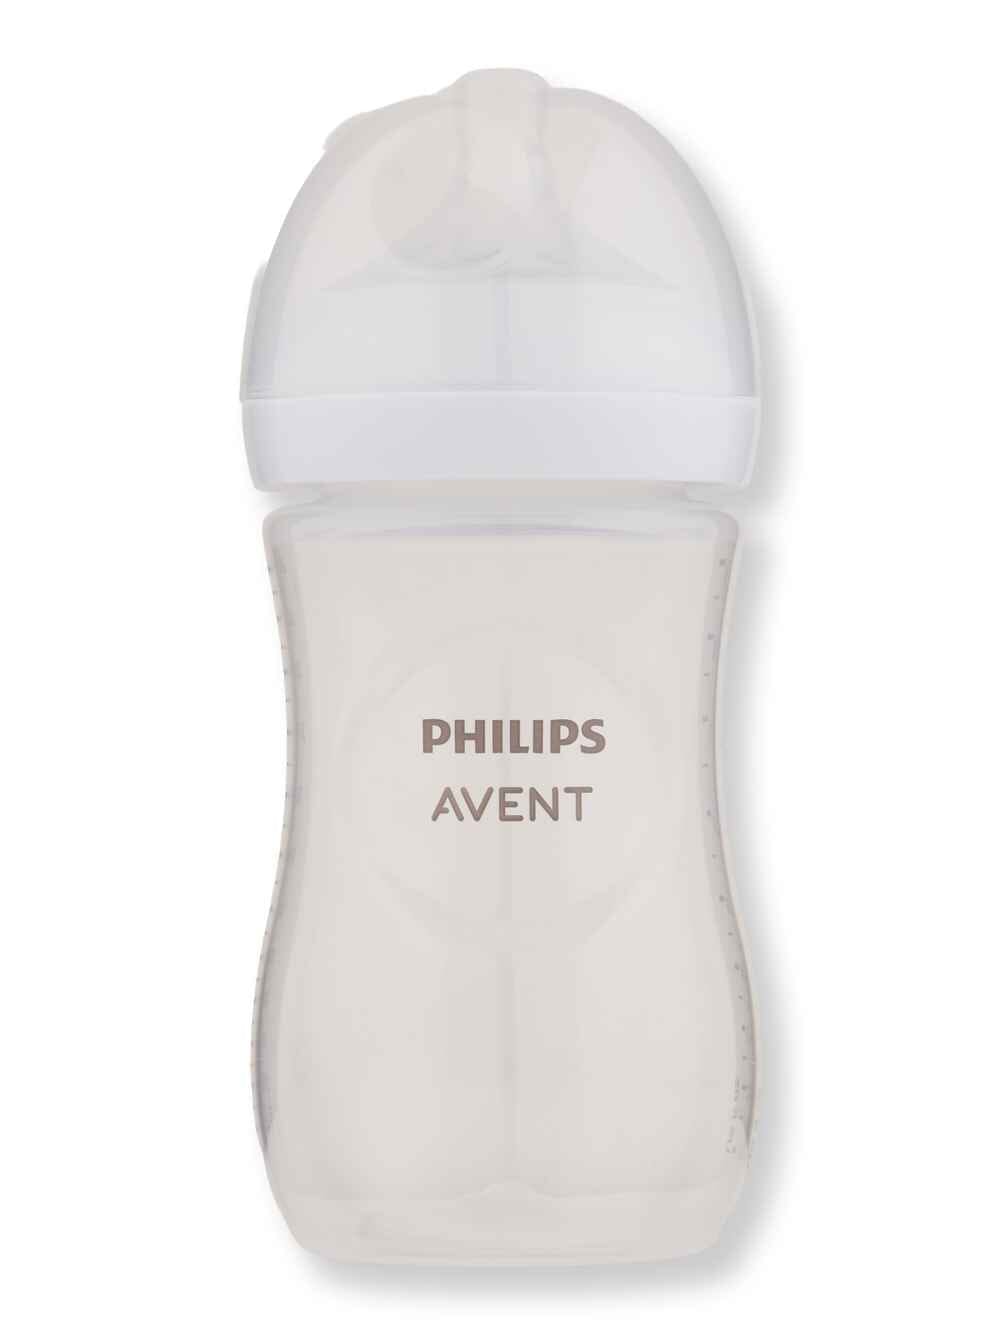 https://editorspick.com/cdn/shop/files/philips-avent-philips-avent-natural-baby-bottle-with-natural-response-nipple-clear-9-oz-baby-bottles-867217_1000x1334.jpg?v=1698977181